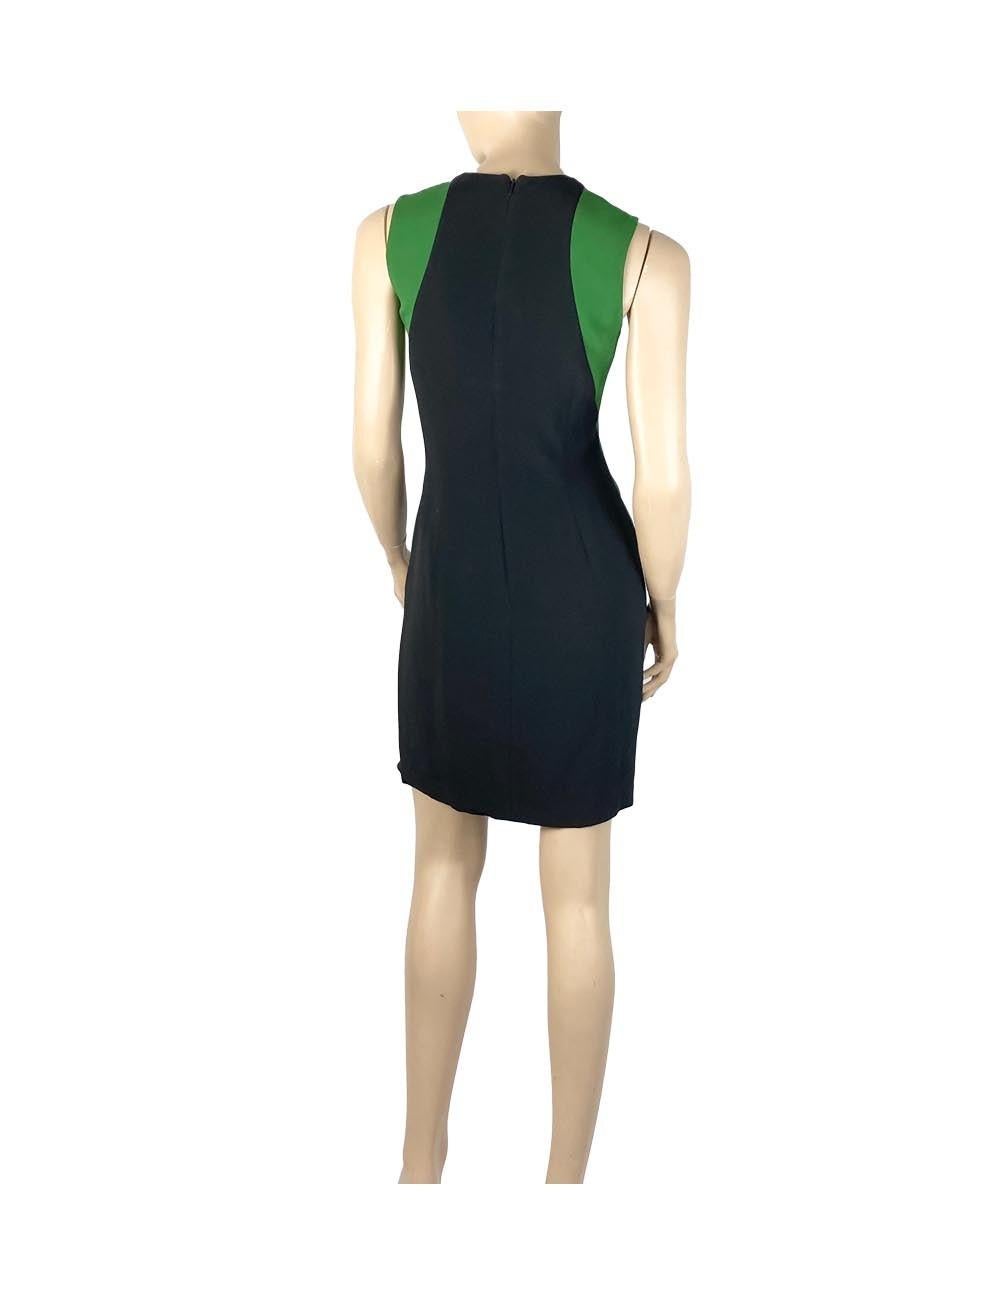 Stella McCartney IT 40 Black Bodycon Dress with Green Detail In Excellent Condition For Sale In Amman, JO